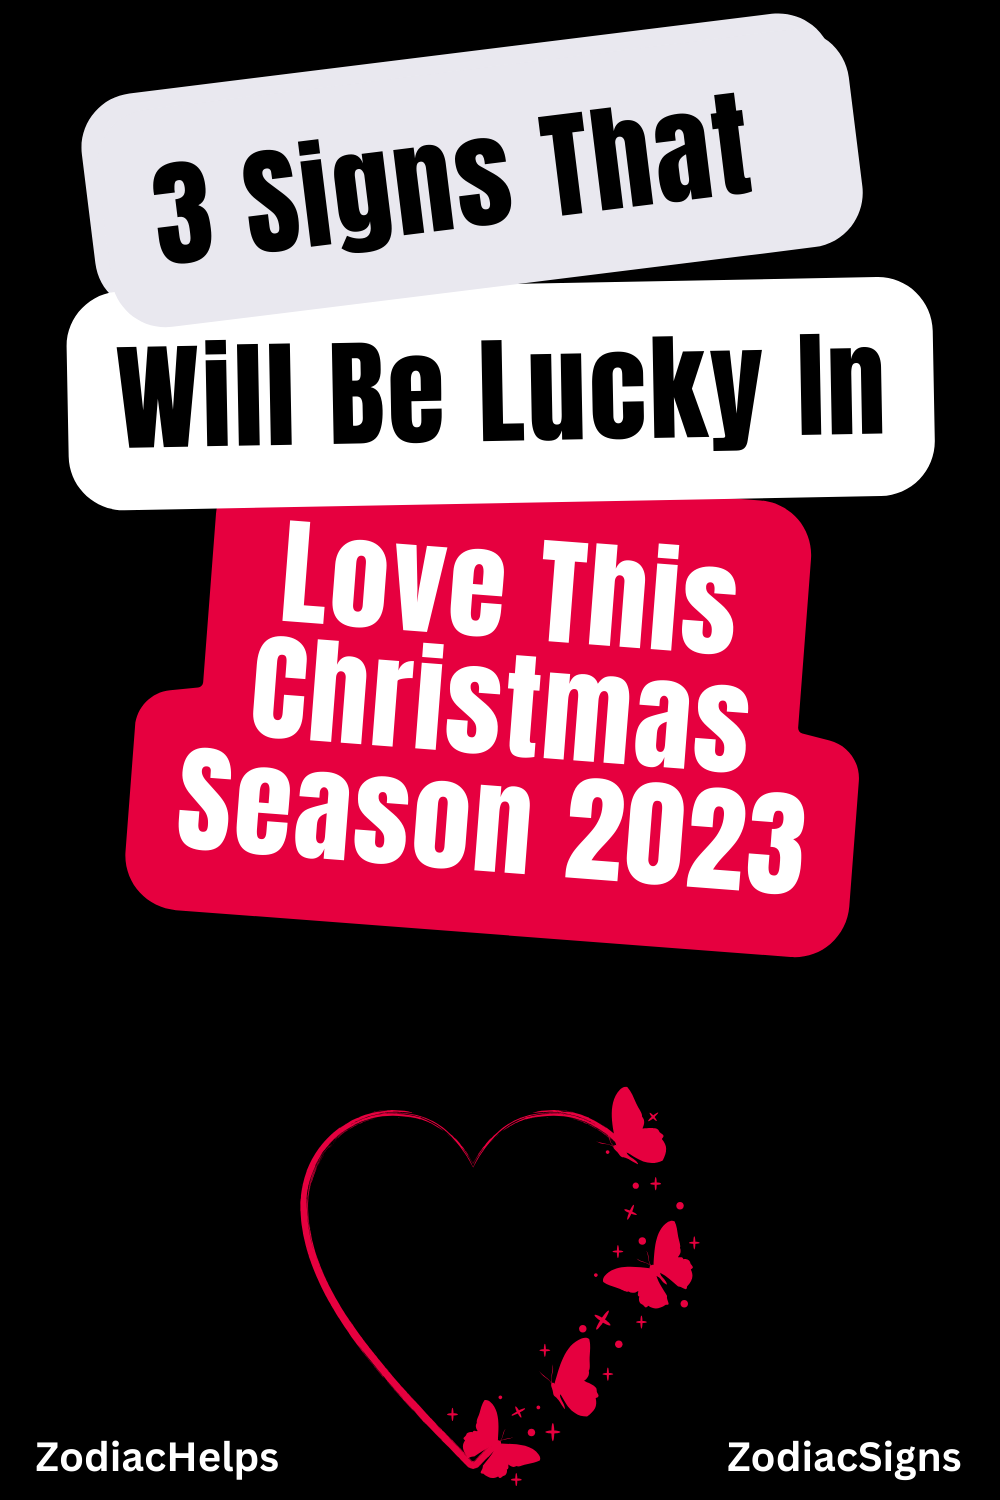 3 Signs That Will Be Lucky In Love This Christmas Season 2023